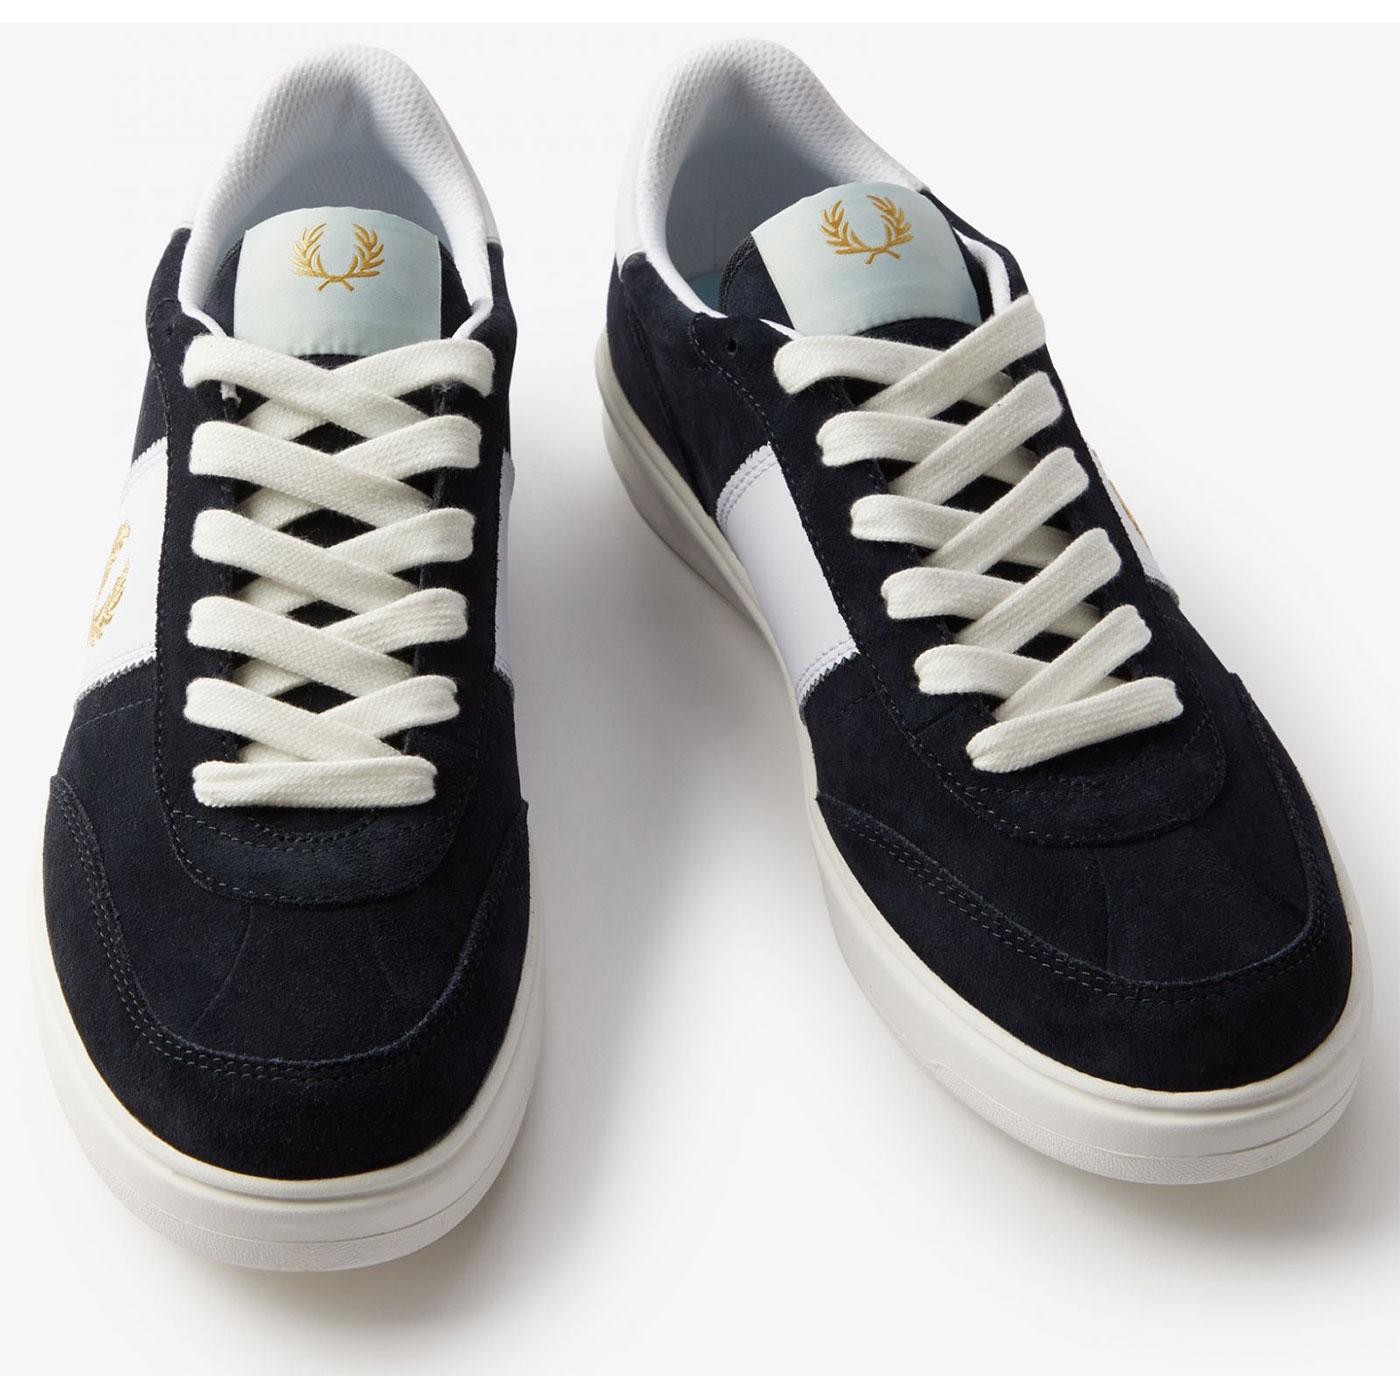 FRED PERRY B400 Suede Mens Retro Trainers in Navy